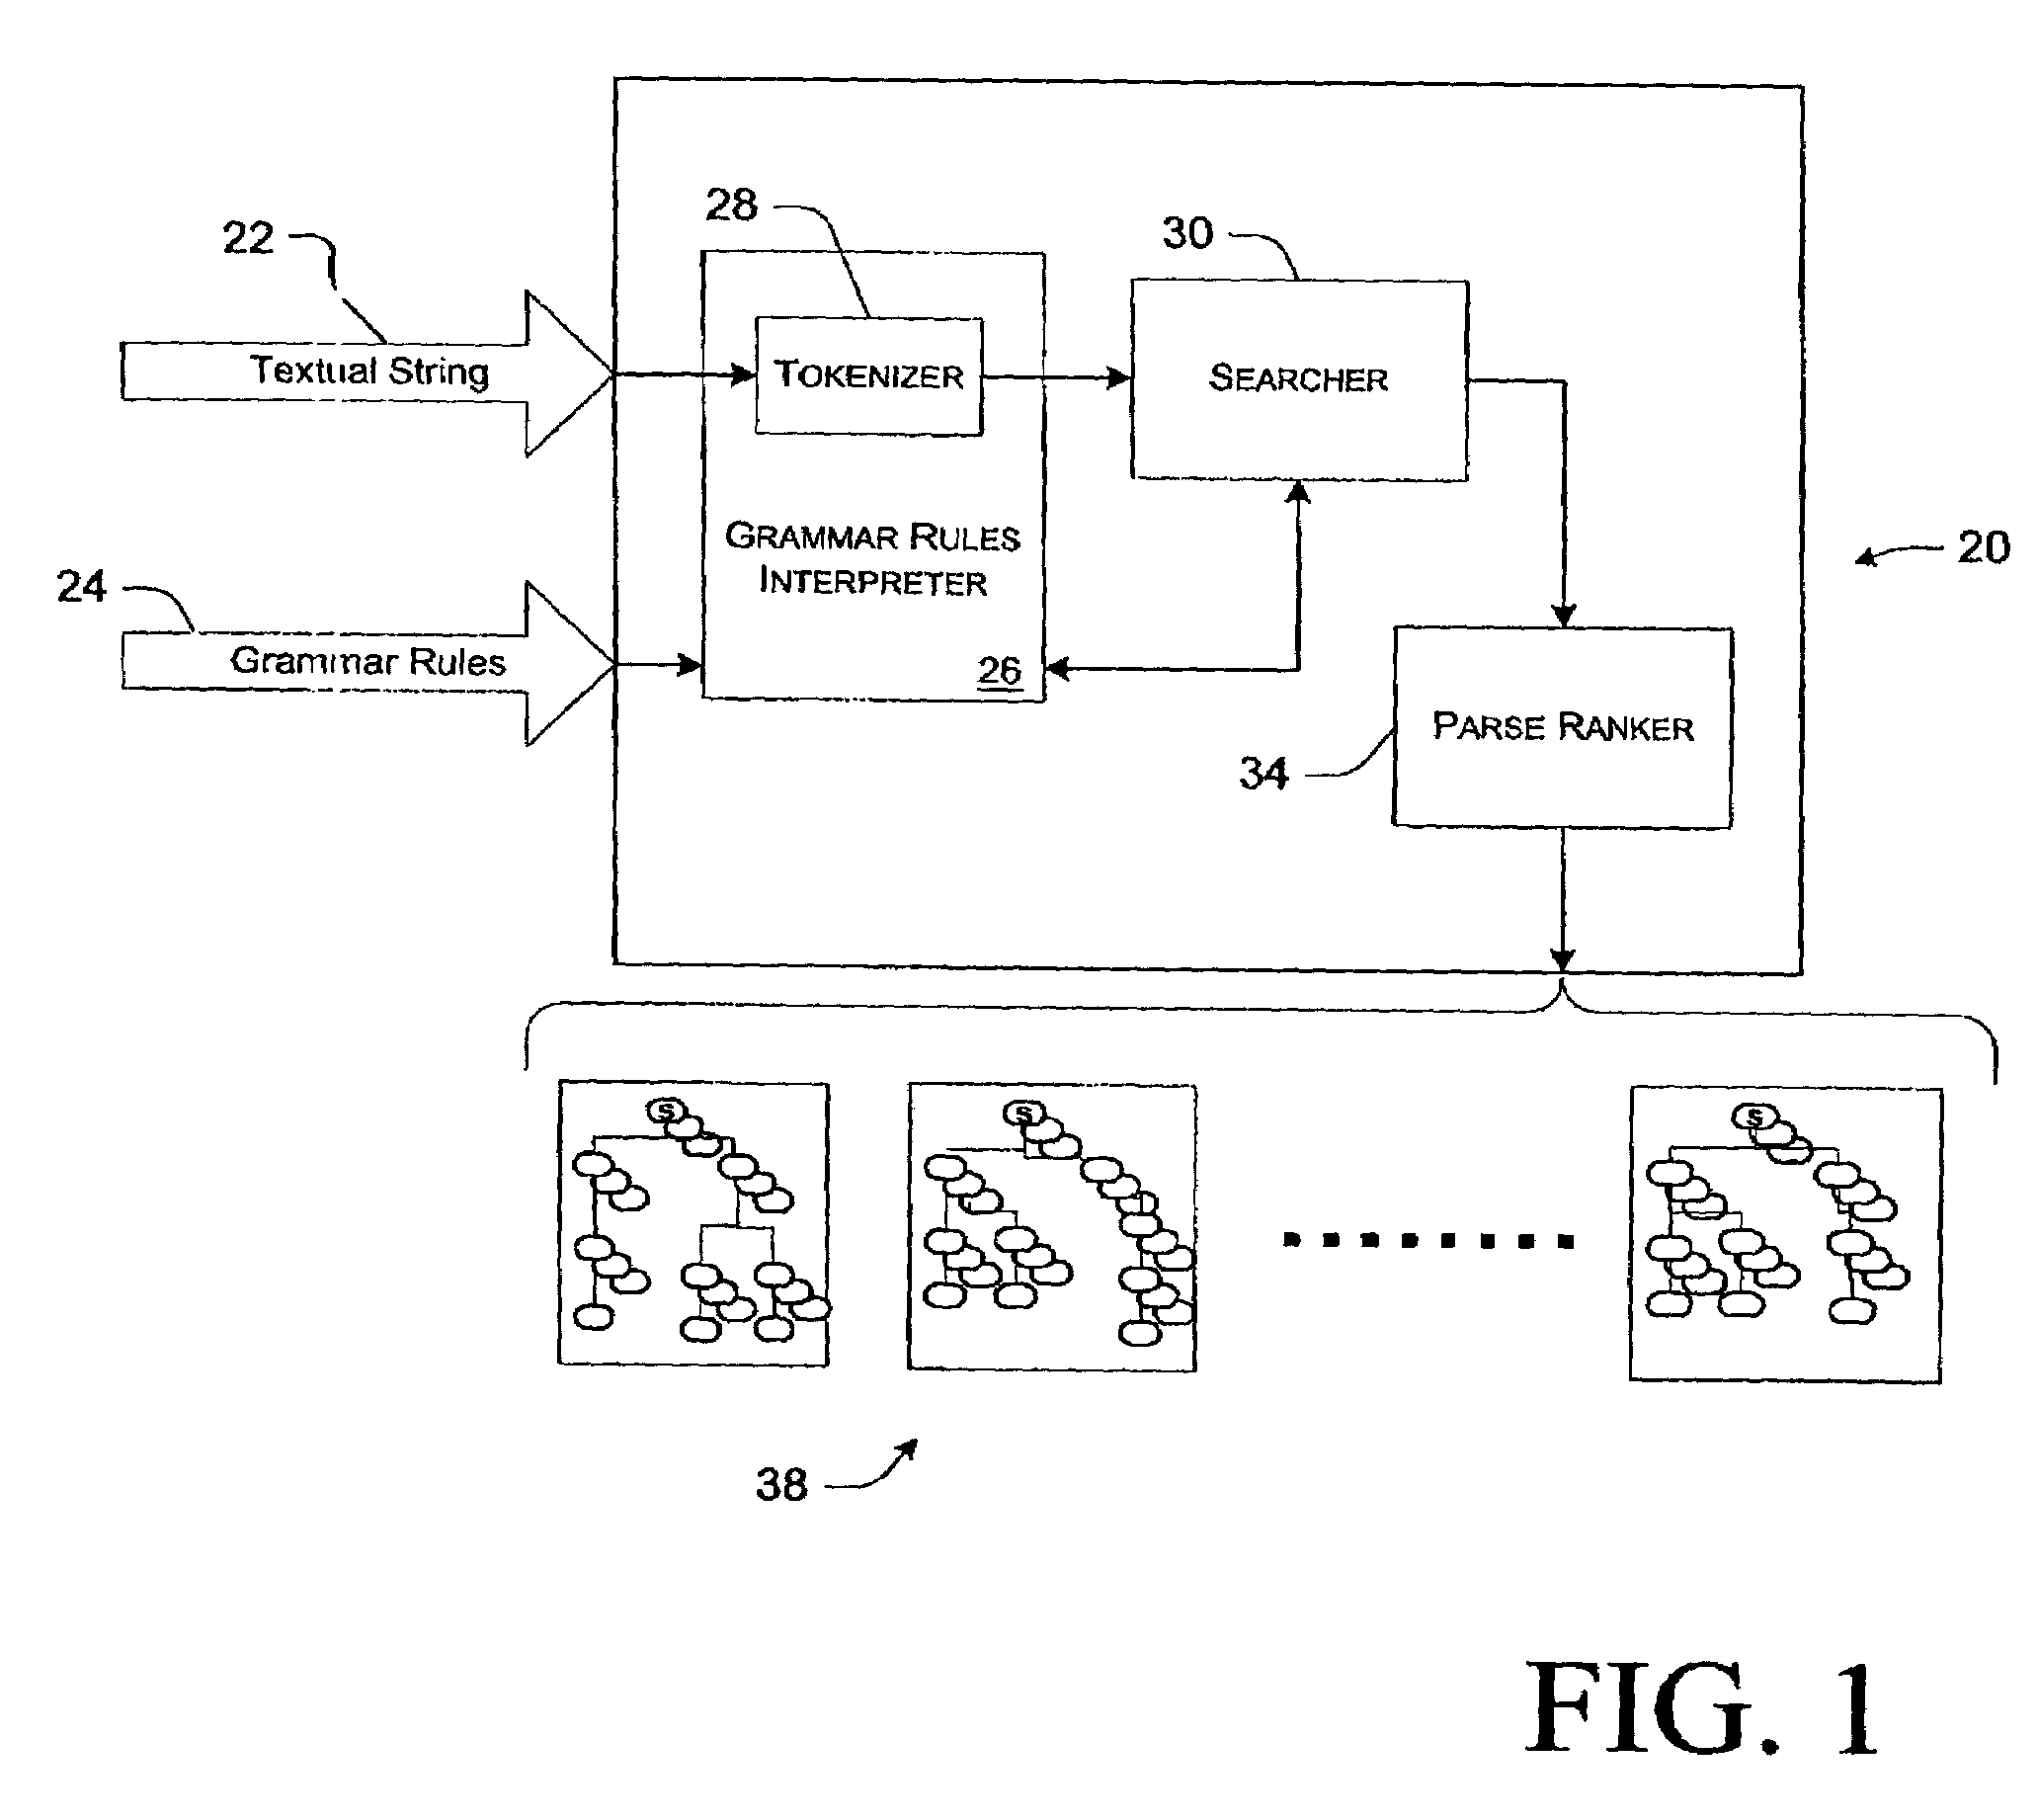 Method and apparatus for improved grammar checking using a stochastic parser